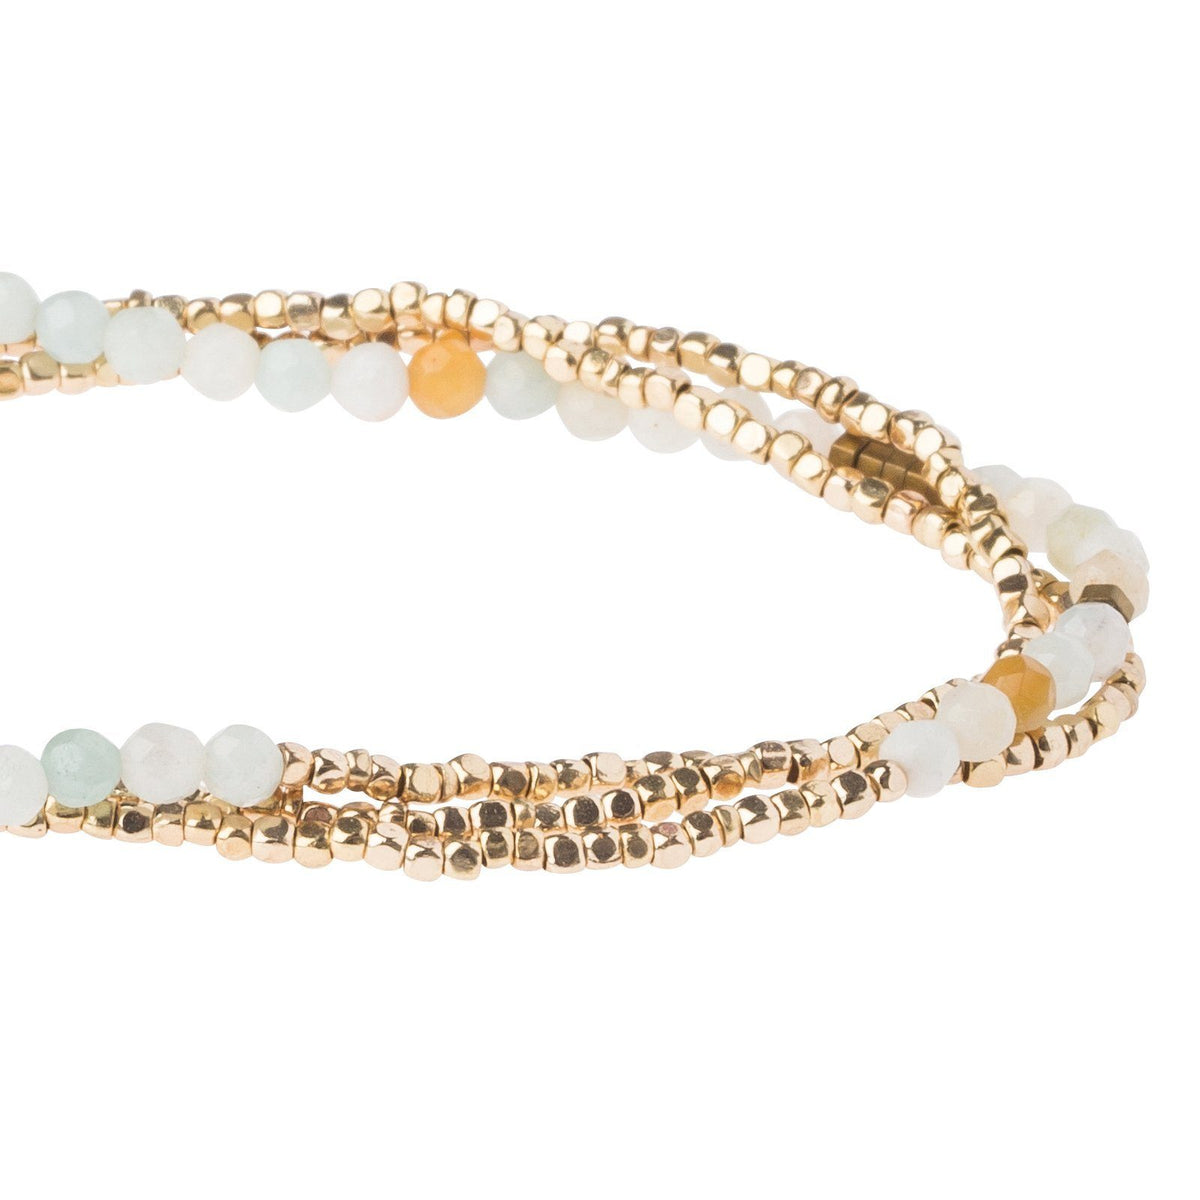 Scout Curated Wears Delicate Stone Amazonite - Stone of Courage (1733247565867)